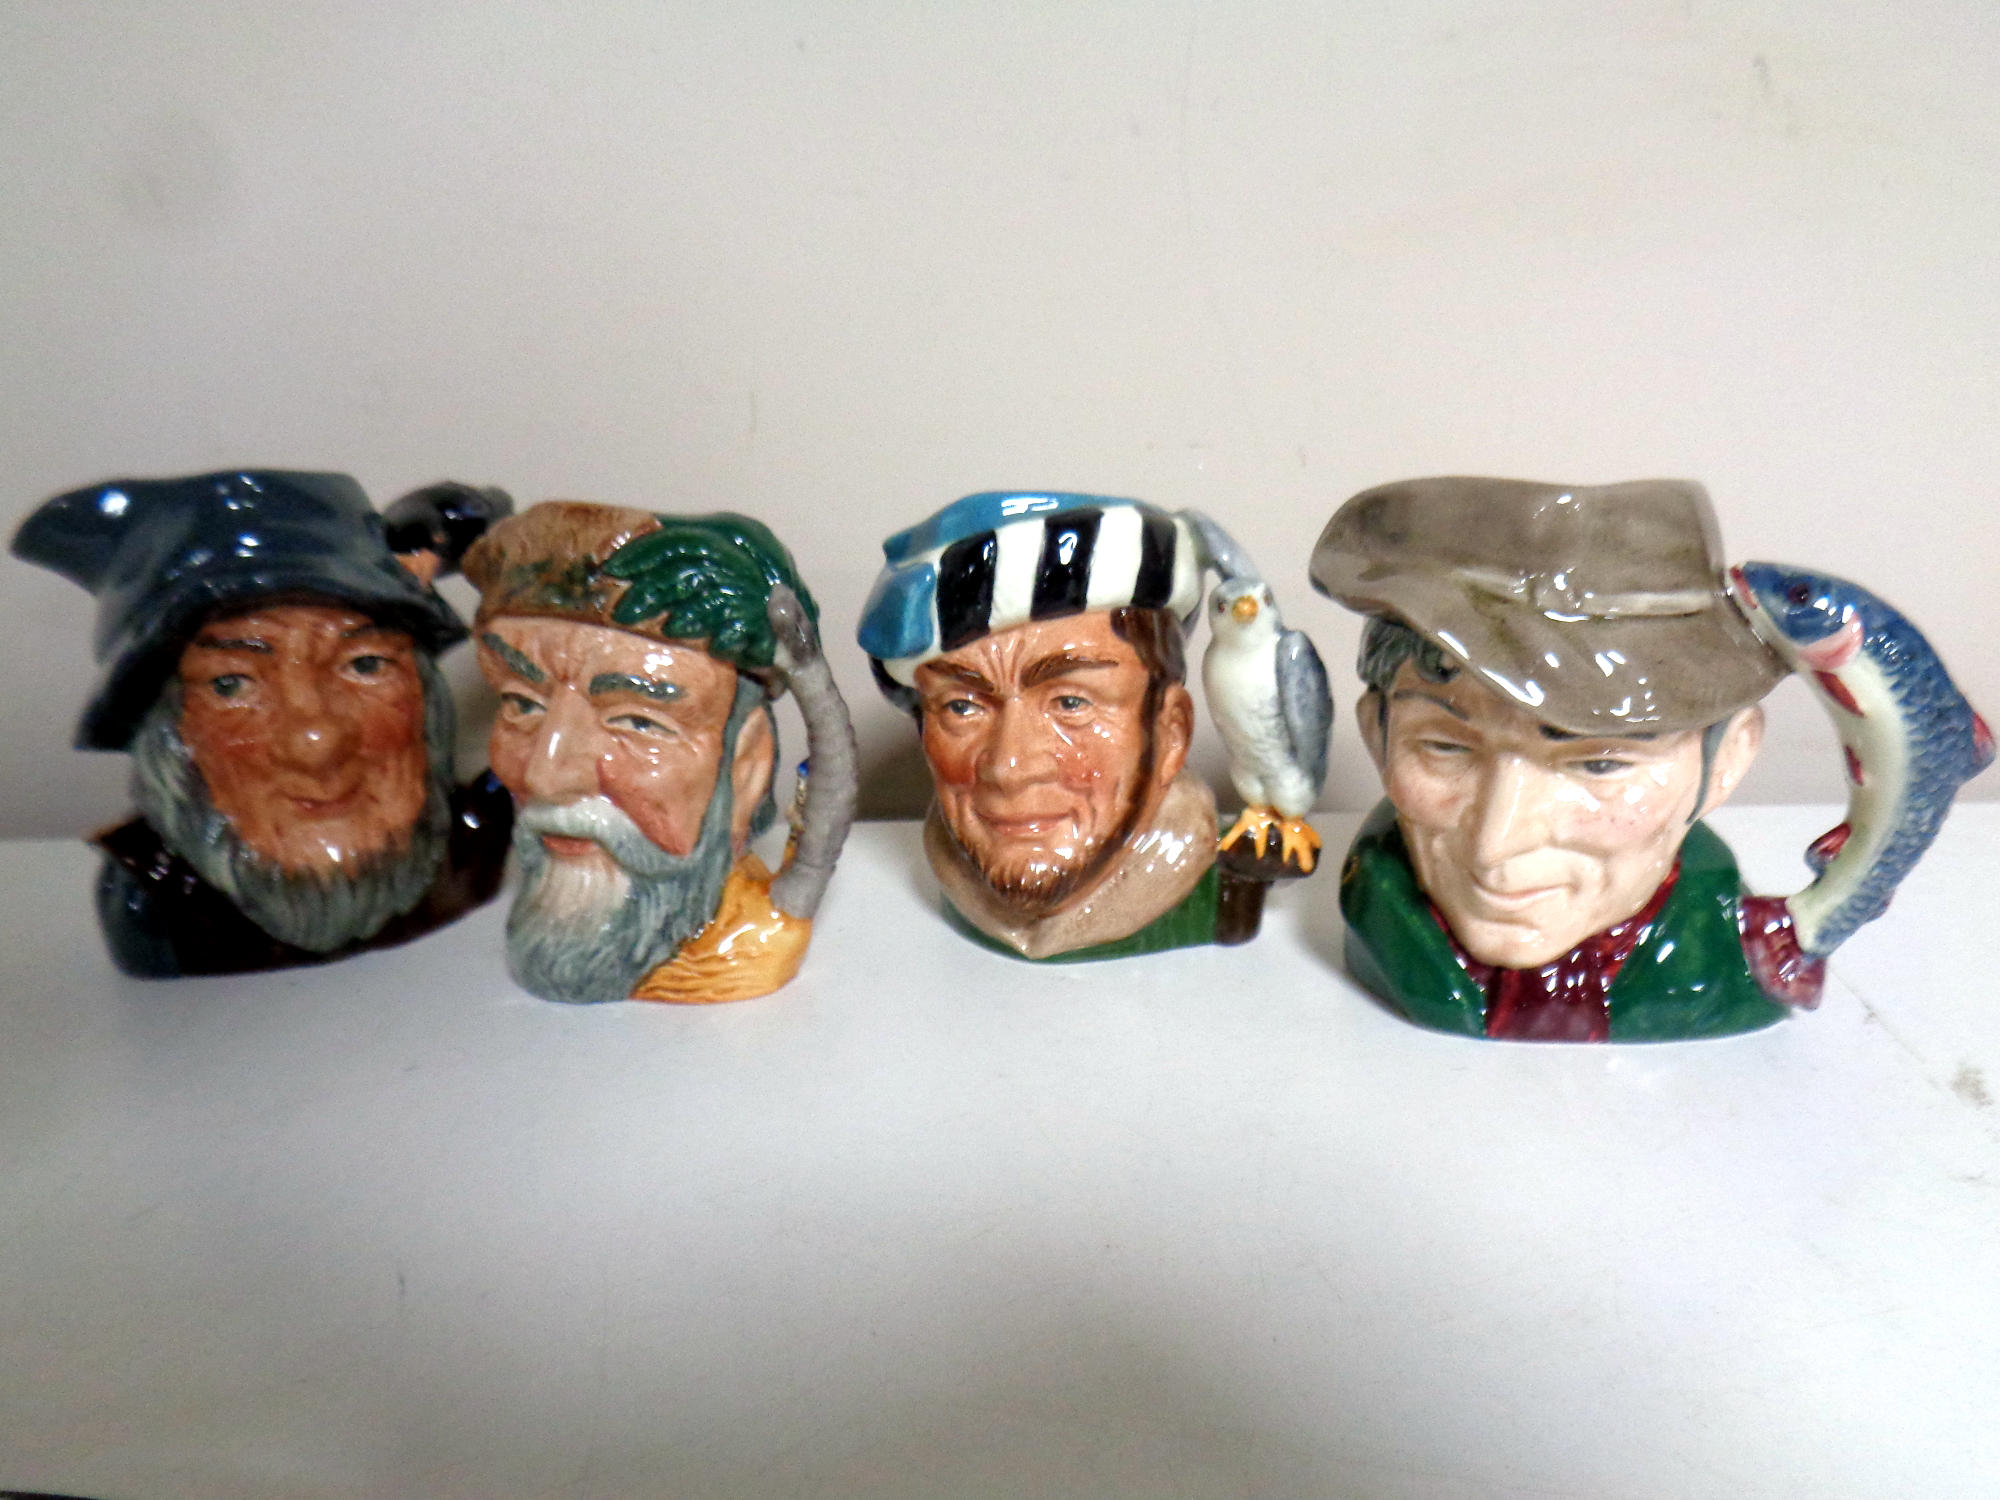 Four small Royal Doulton character jugs - The Poacher, The Falconer,